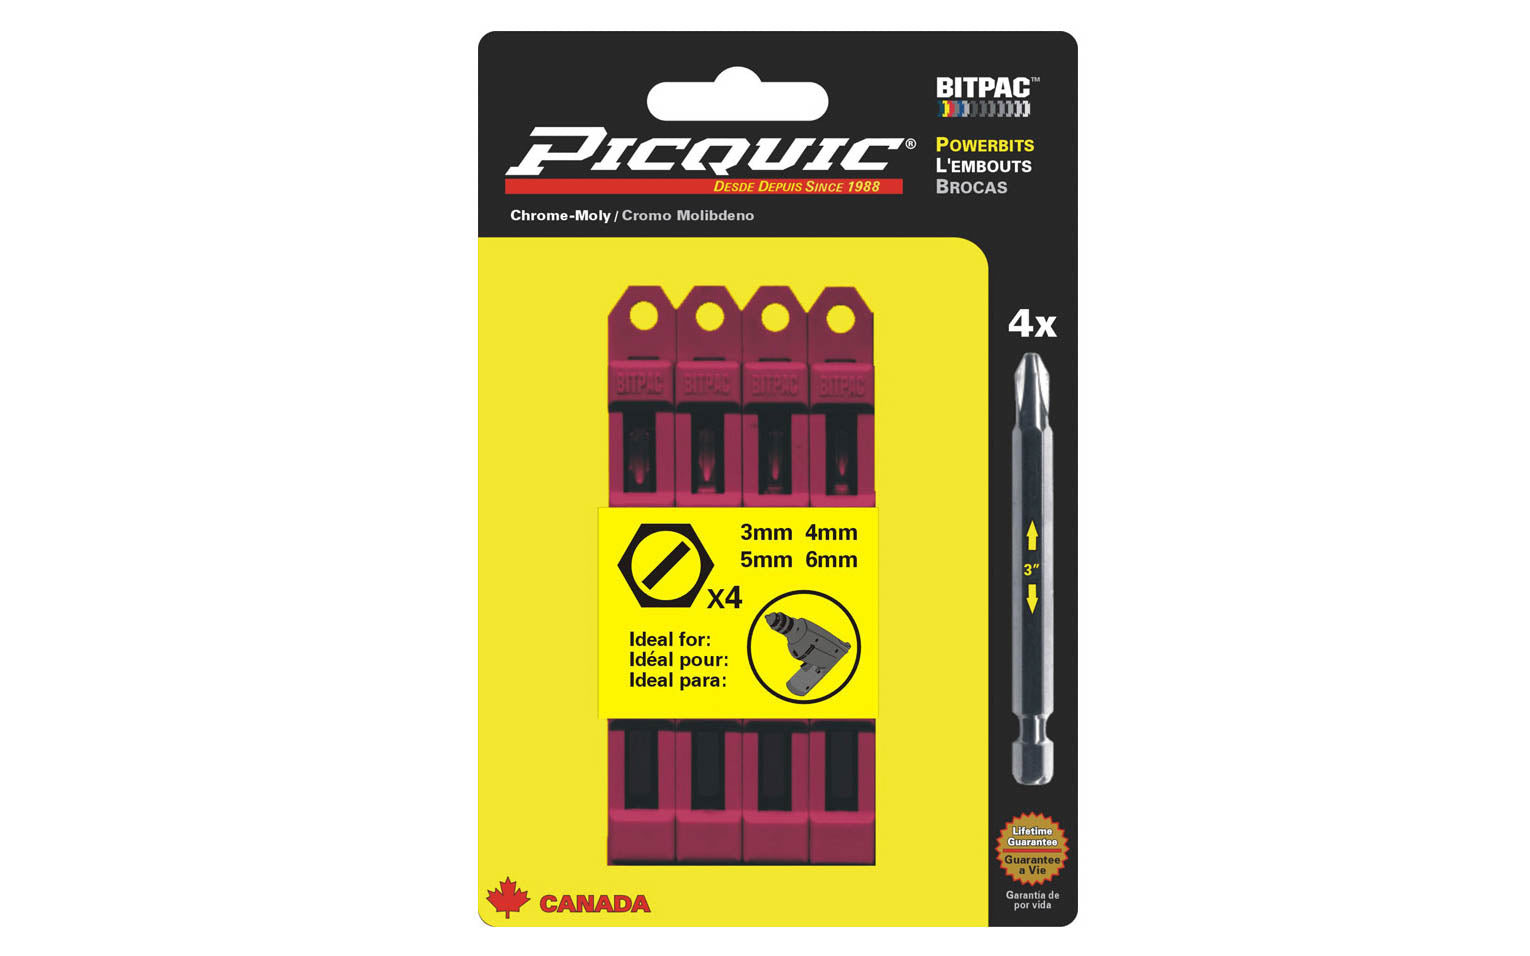 Picquic 4-piece Slotted Metric Powerbit Set with sizes 3 mm,  4 mm,  5 mm,  6 mm metric slotted drive bits. Replacement bits for Picquic screwdrivers & also good for use in drills & impact drivers. 1/4” hex ball power shank. 057369950095